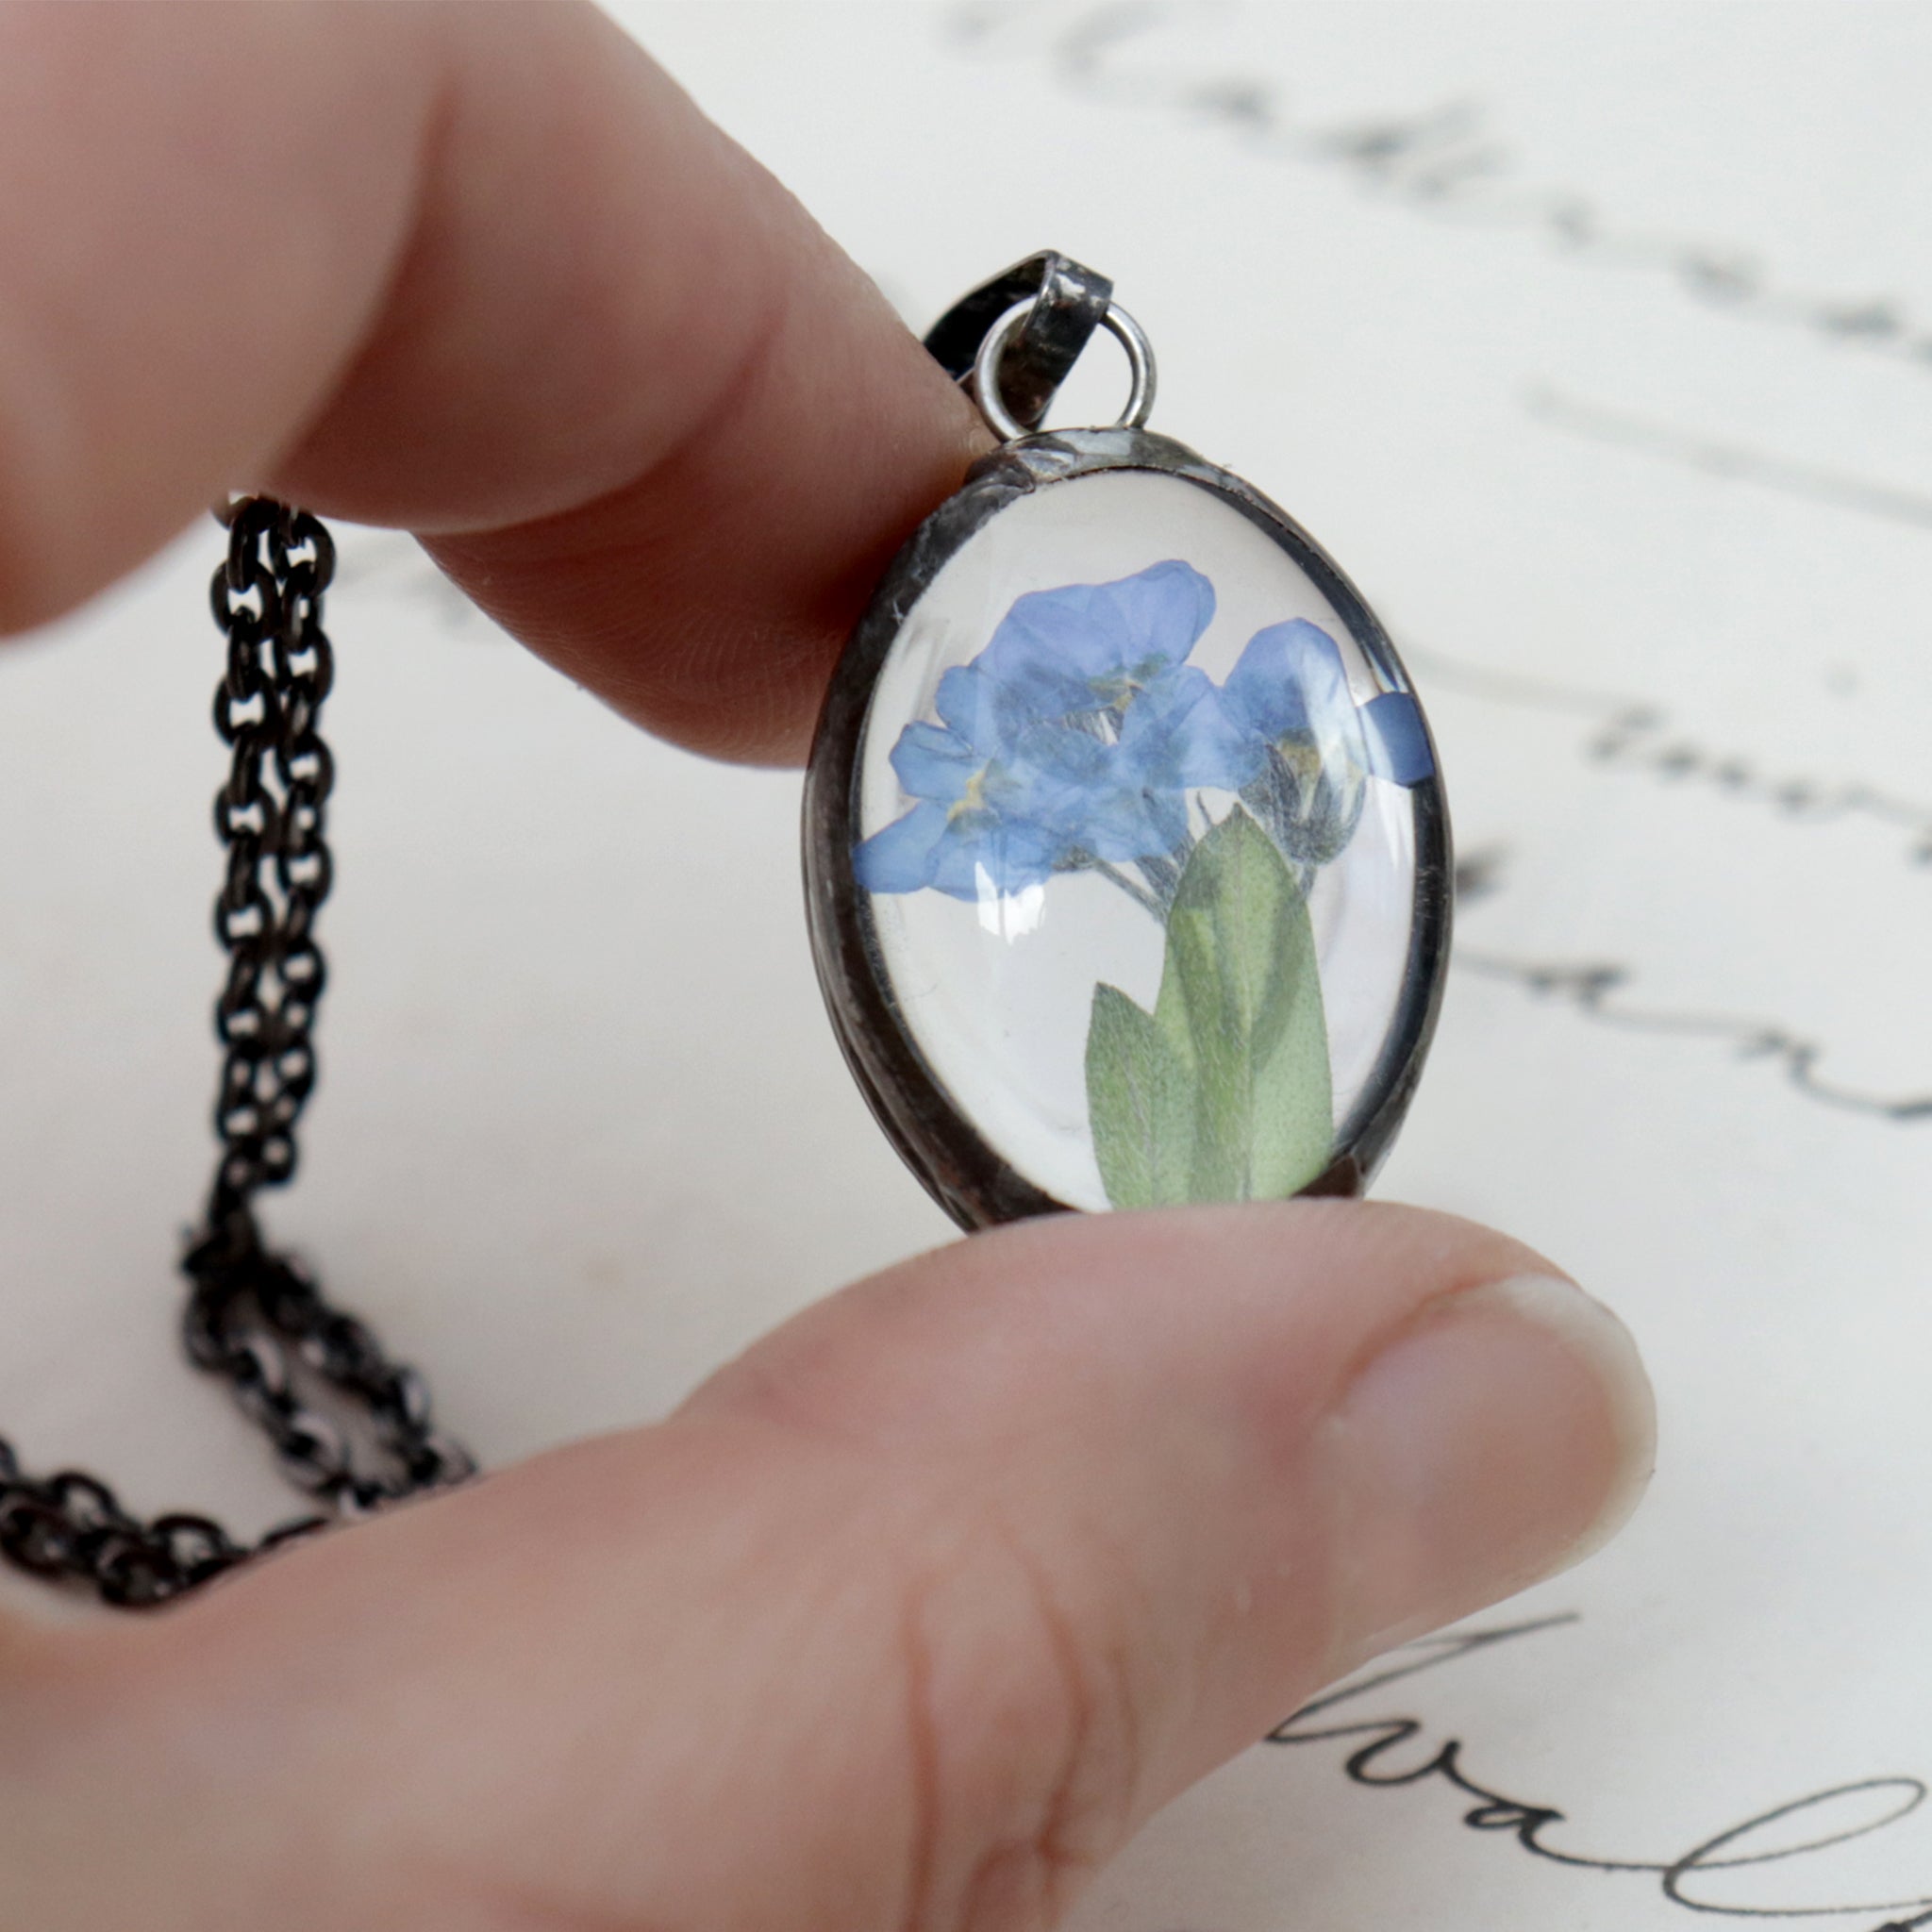 Forget-me-not oval little necklace being hold between thumb and index